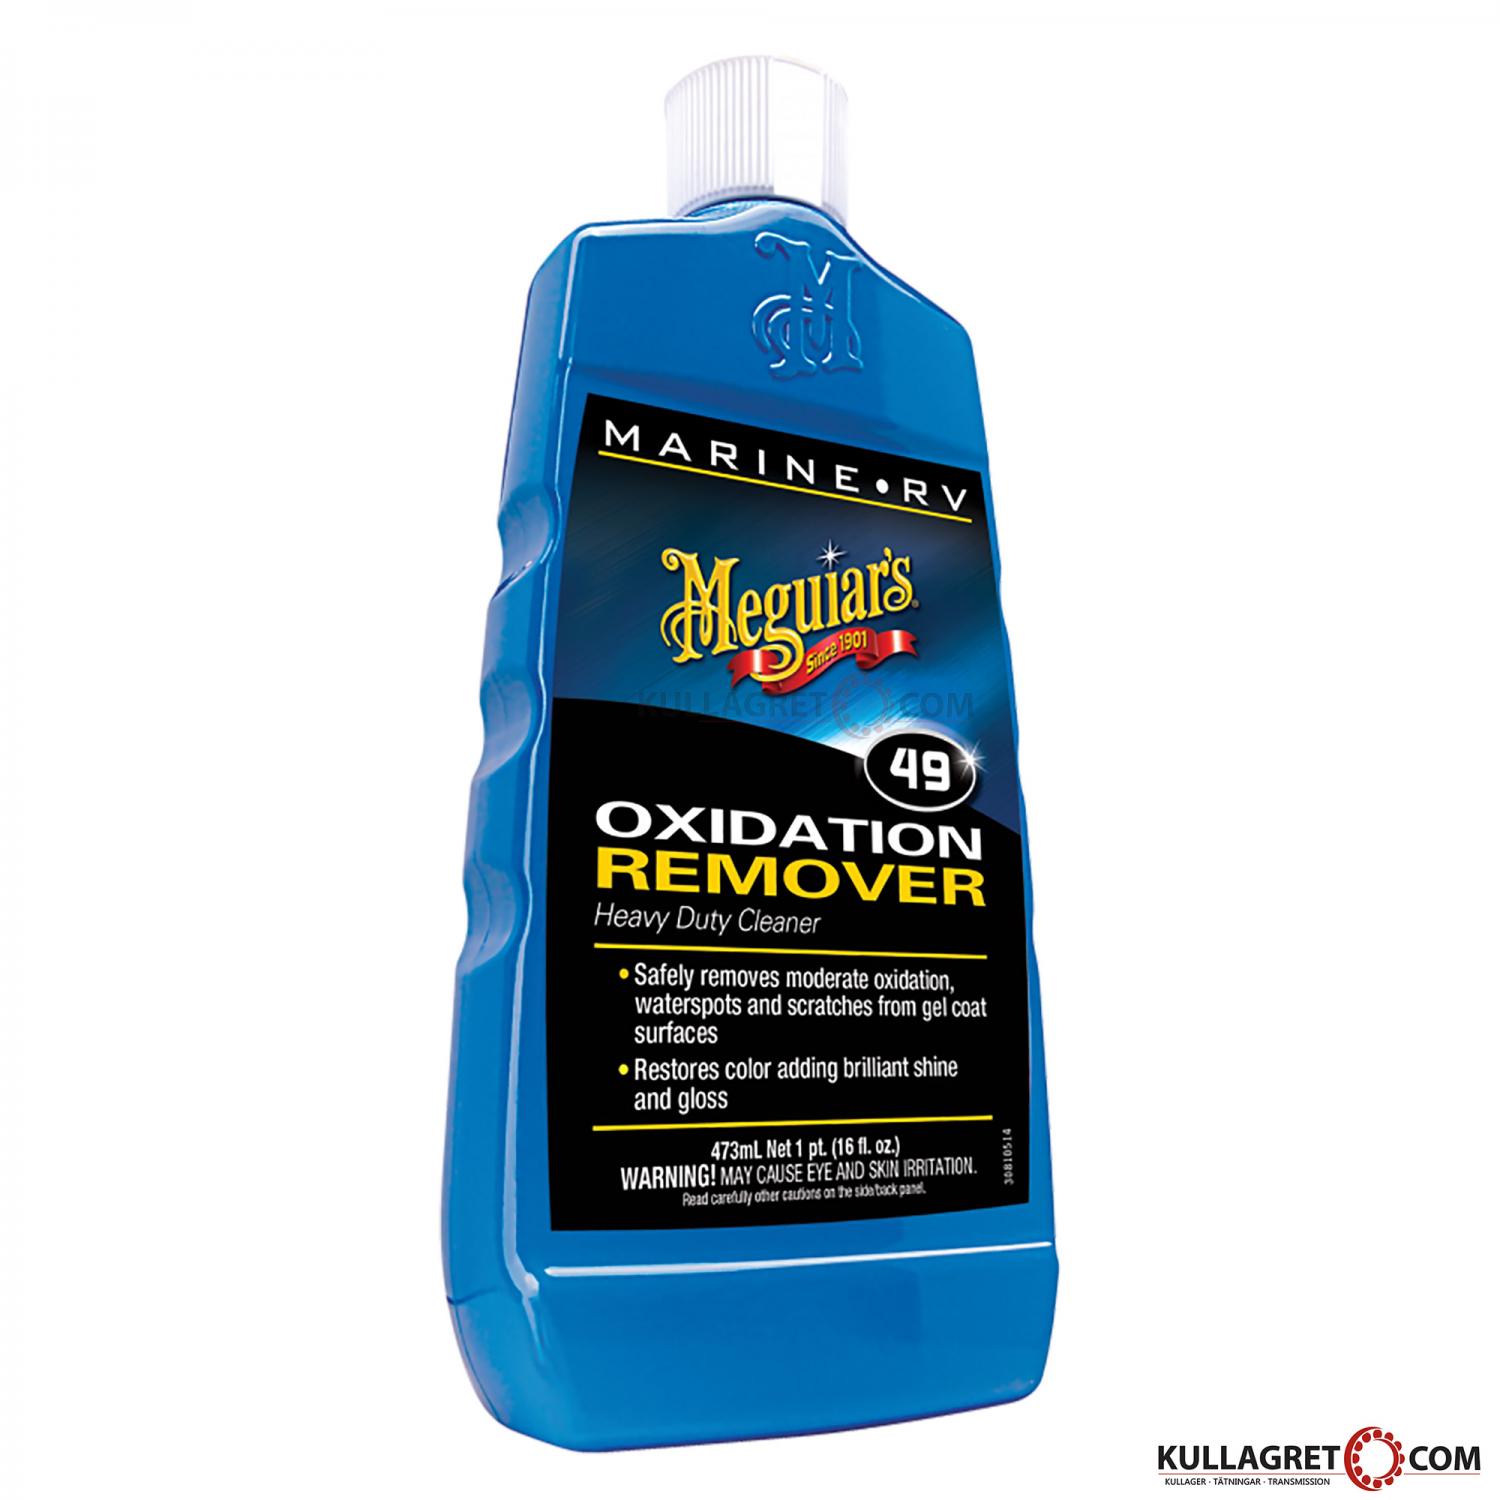 M49 Oxidation Remover Marin  Meguiars